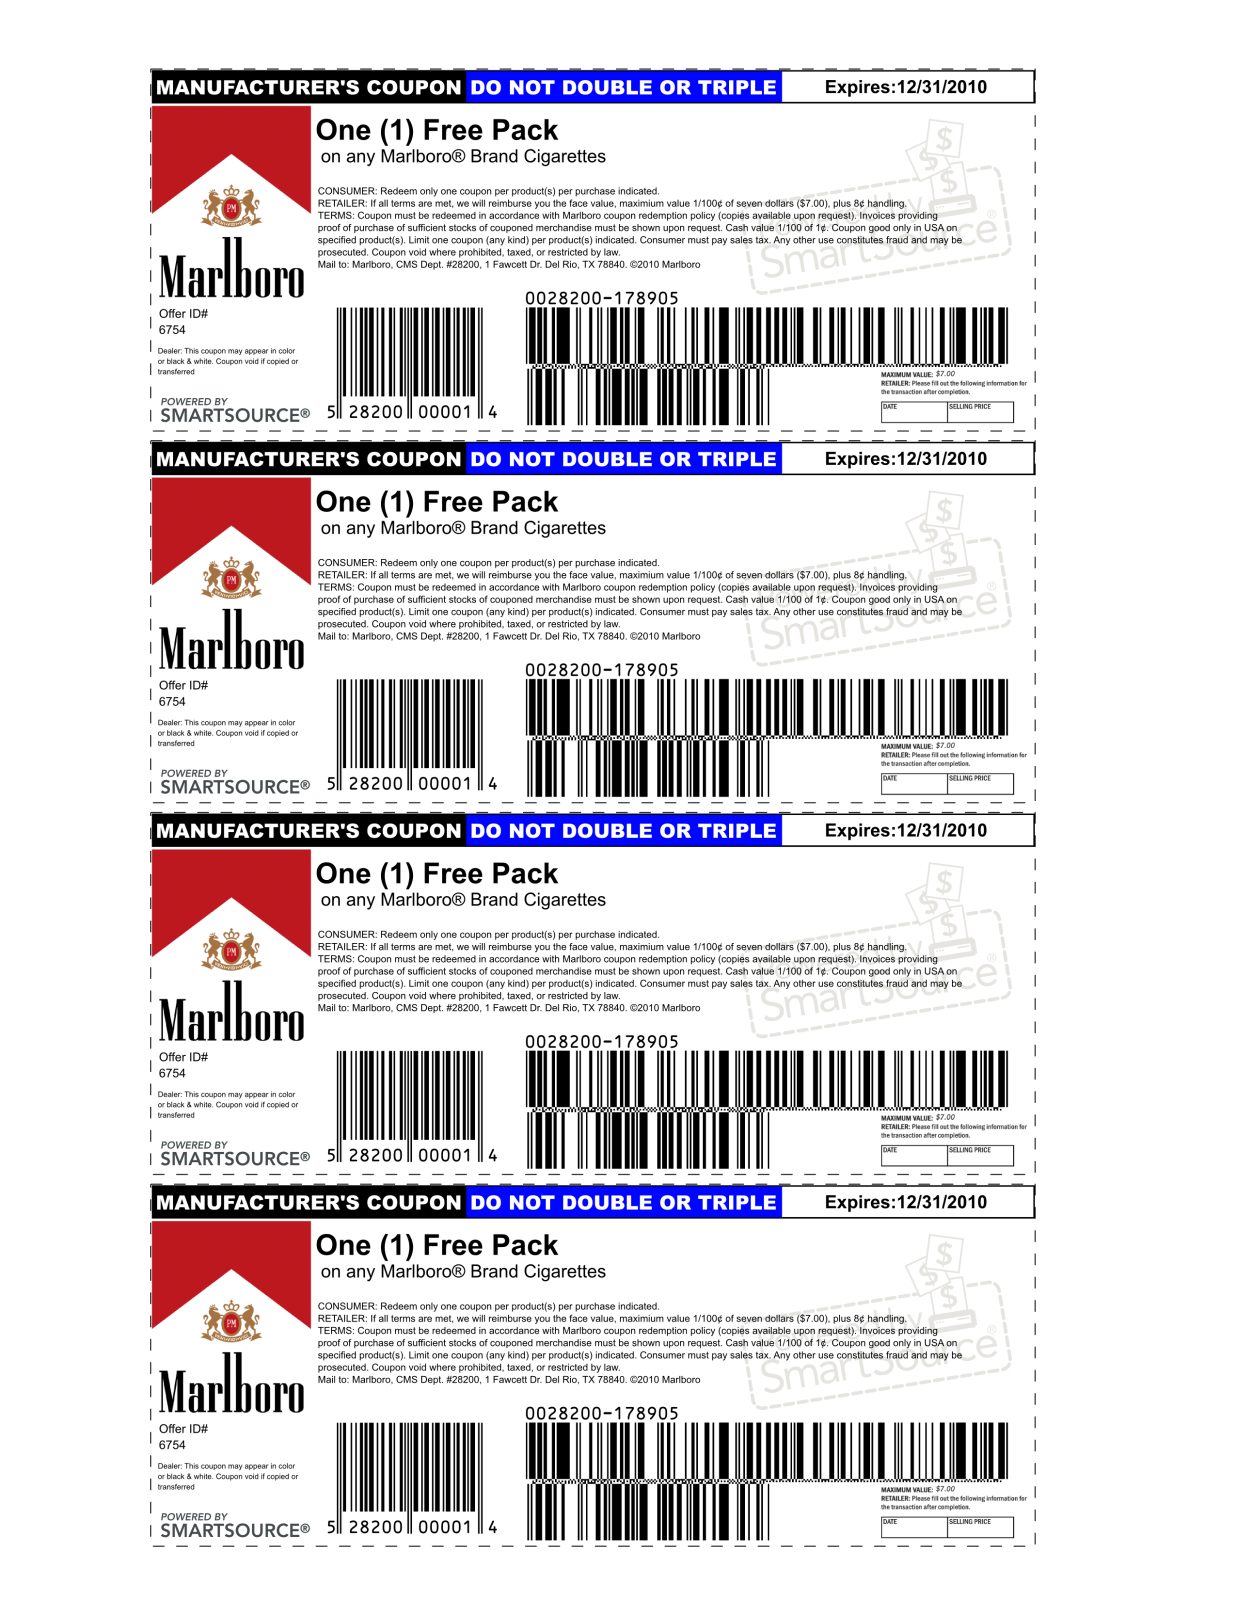 Marlboro Coupons Printable 2013 | Is Using A Possibly Fake Coupon - Free Printable Newport Cigarette Coupons